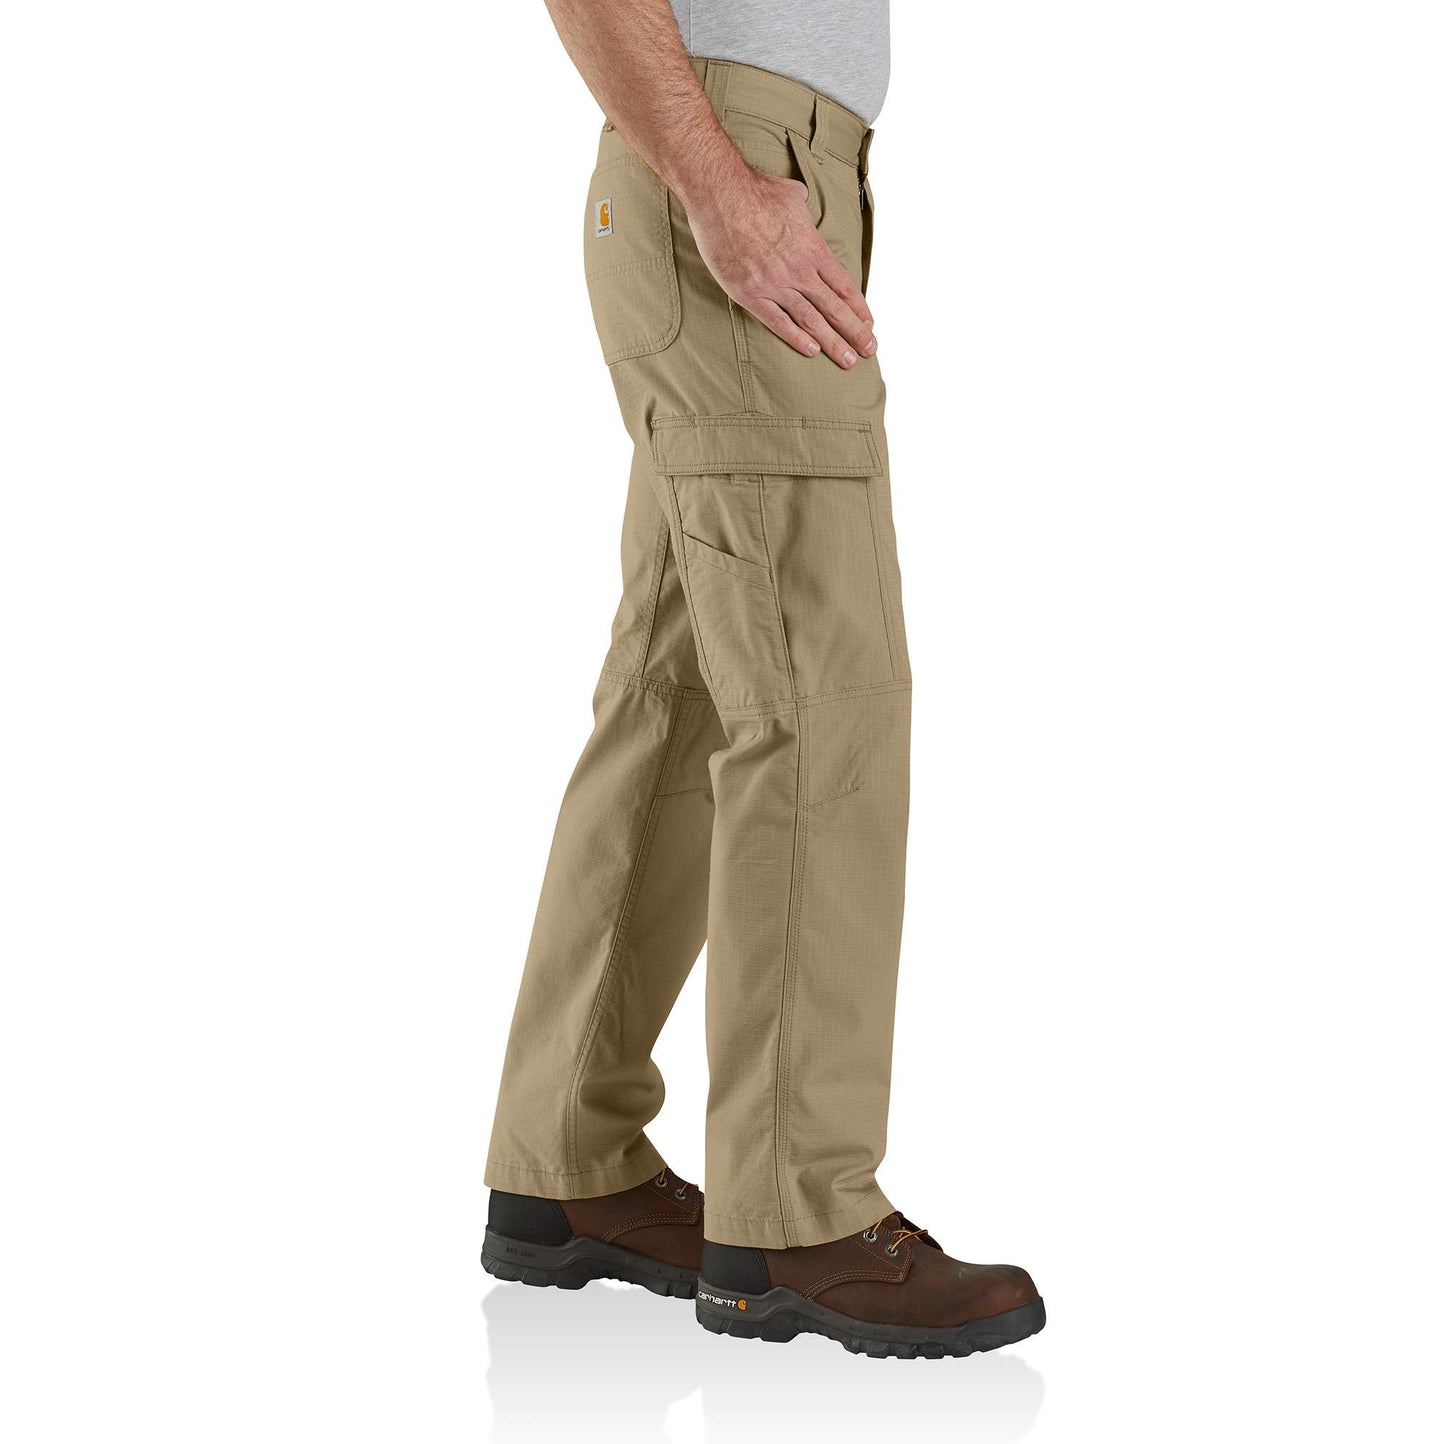 Carhartt Force® Relaxed Fit Ripstop Cargo Work Pant